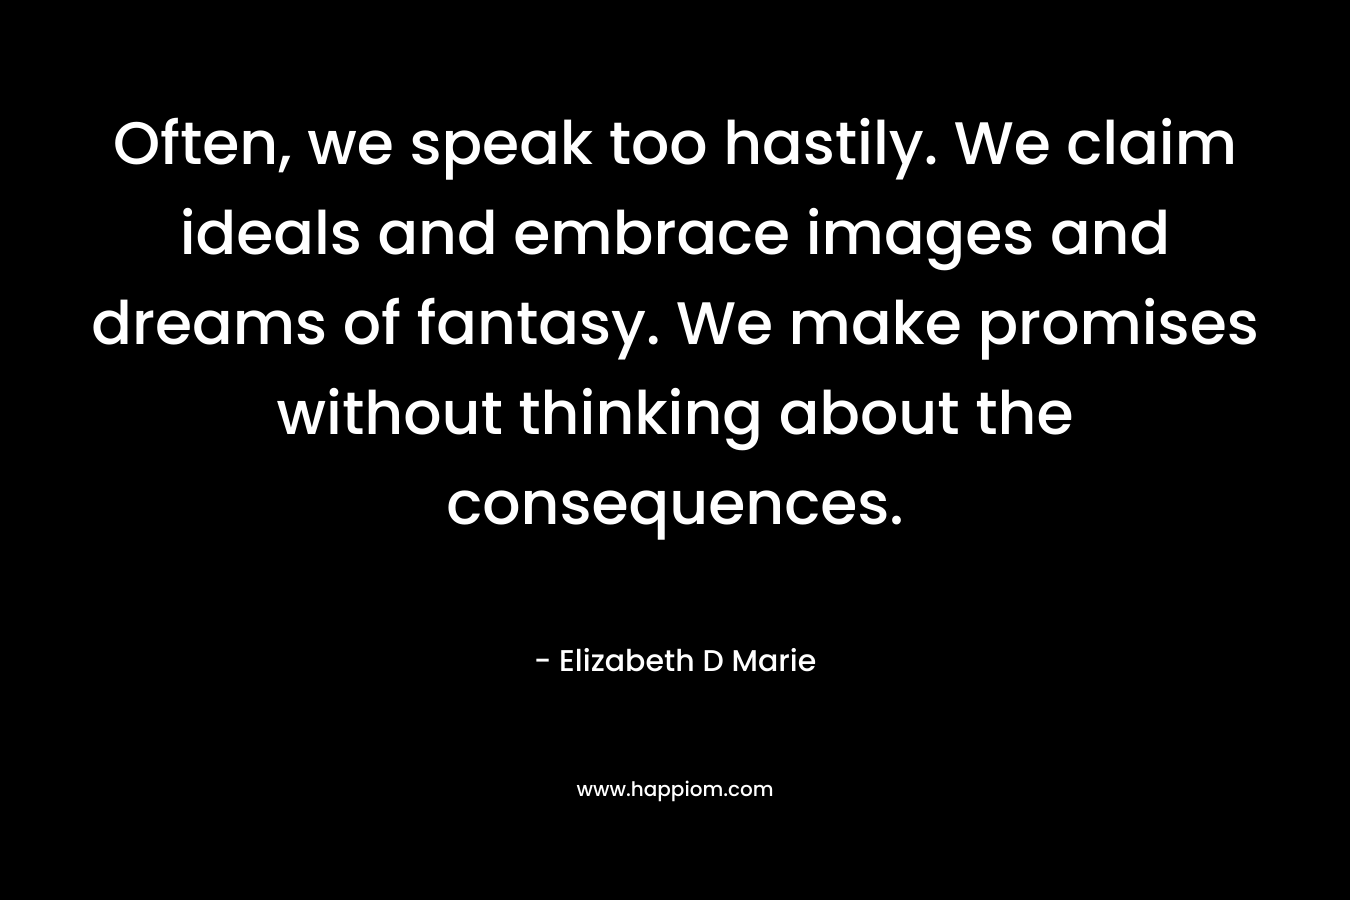 Often, we speak too hastily. We claim ideals and embrace images and dreams of fantasy. We make promises without thinking about the consequences.